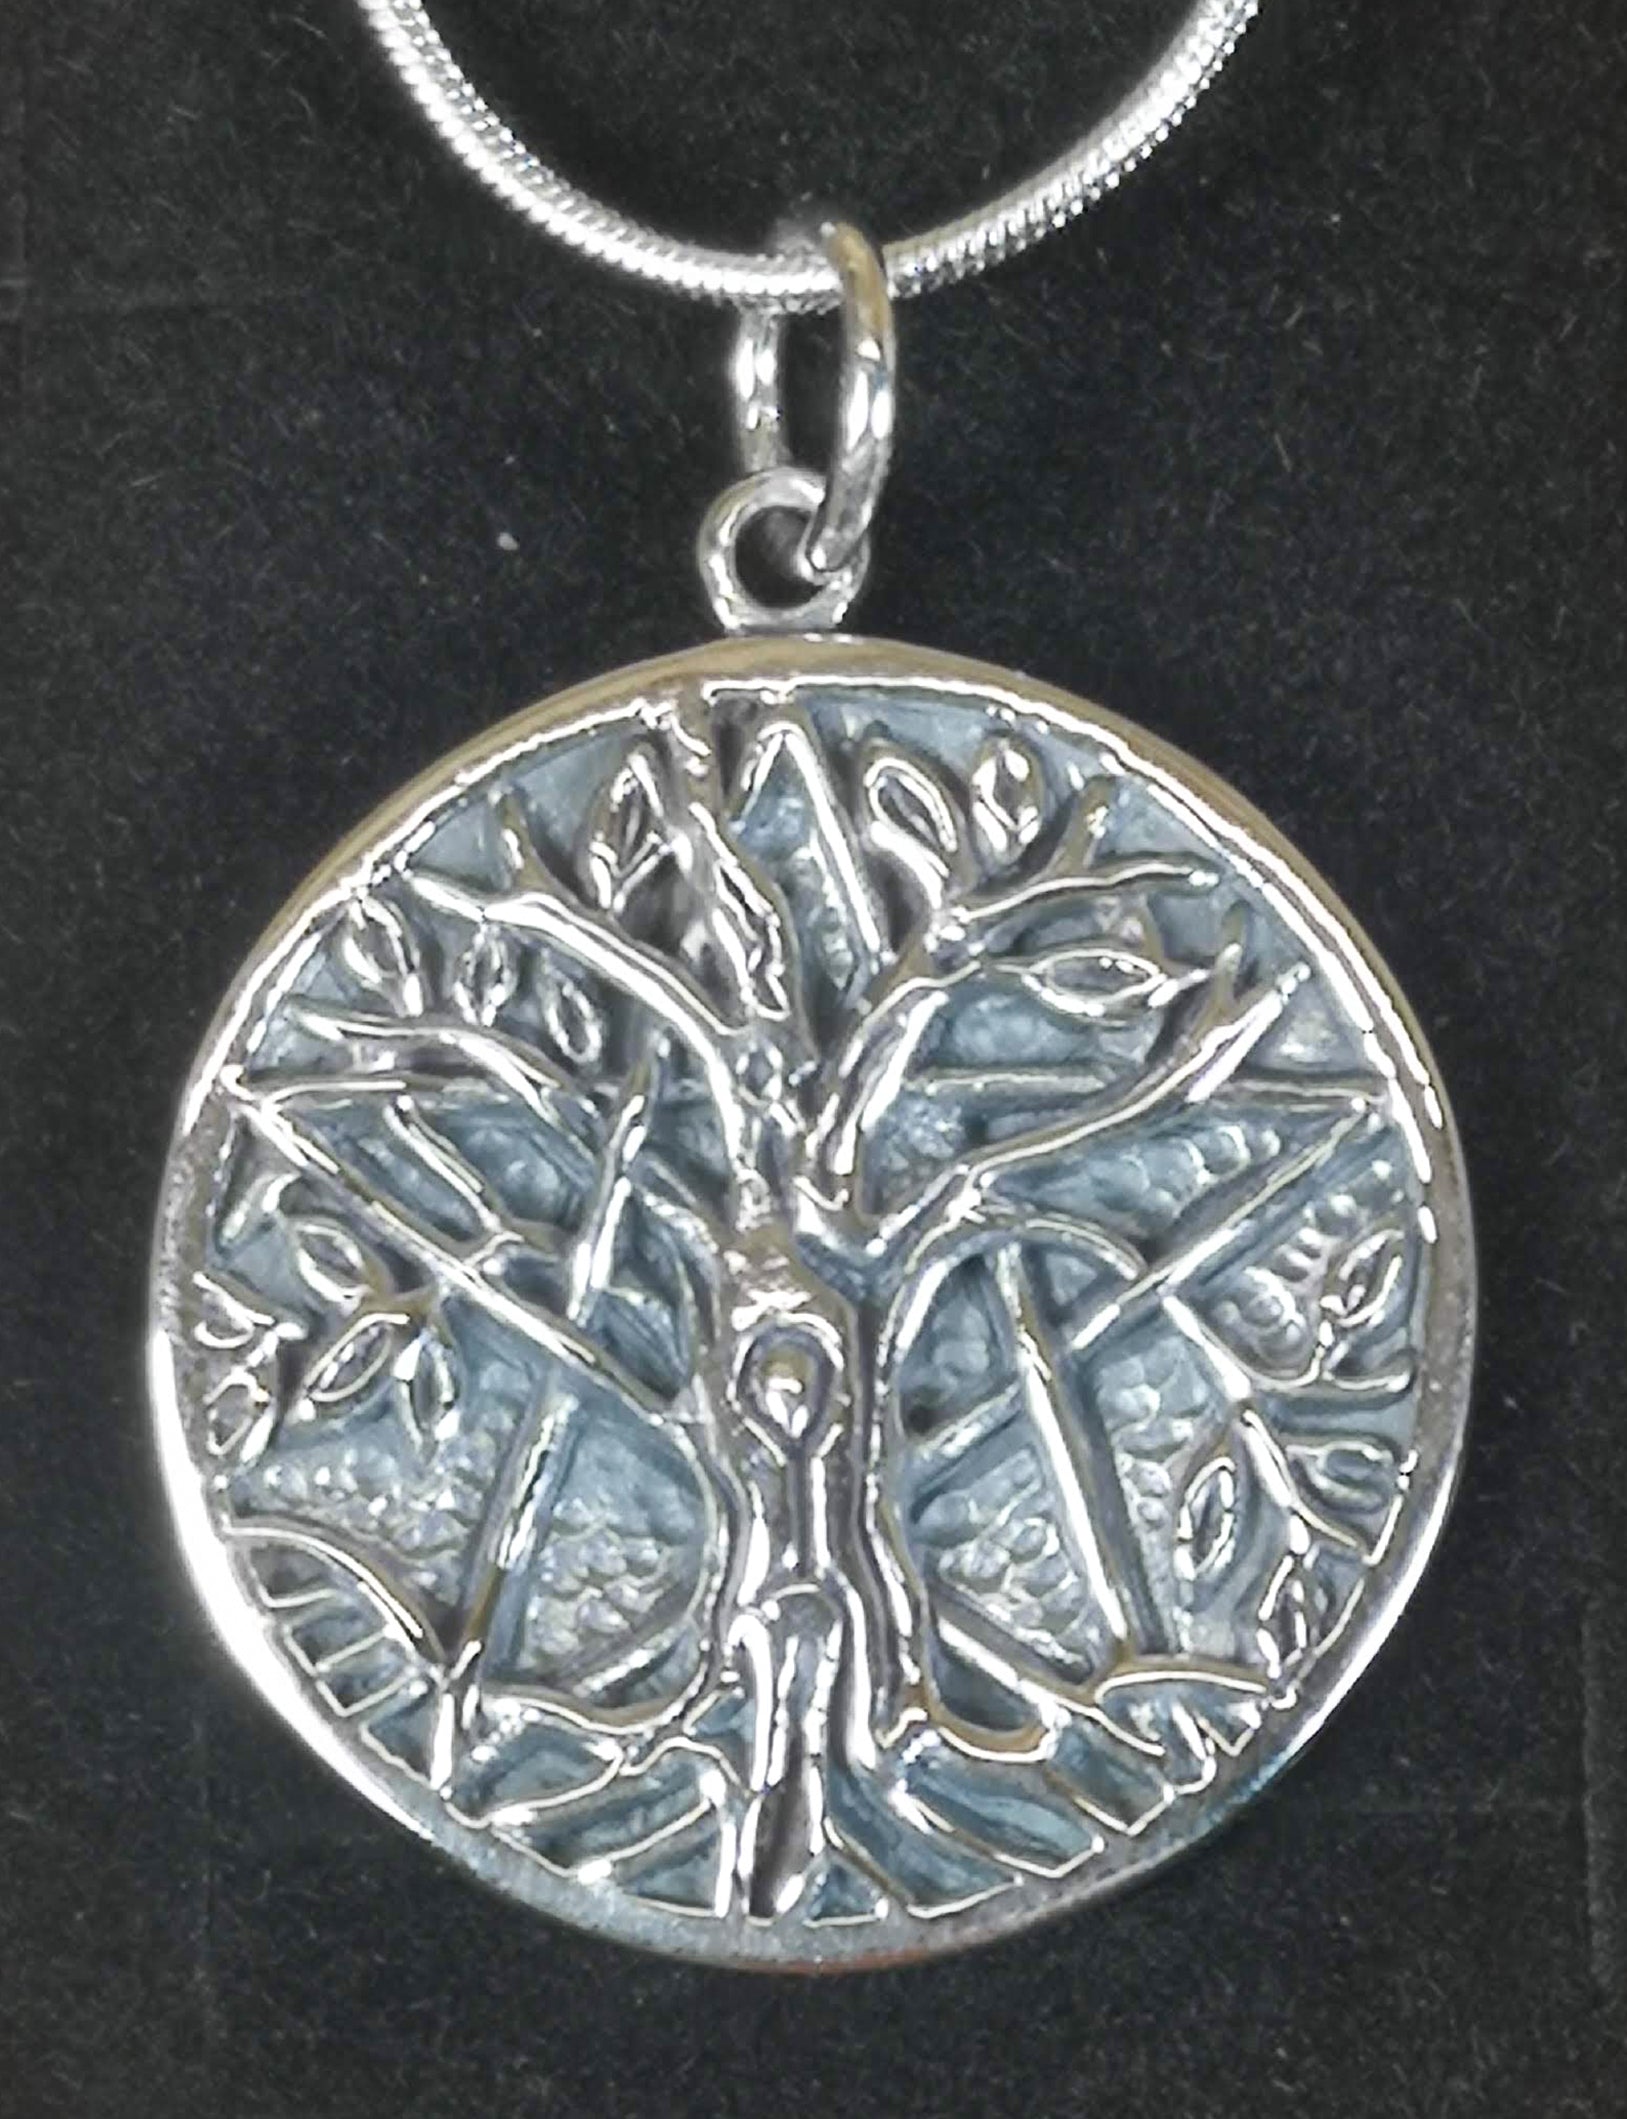 Tree of Life pendant with a Pentagram and 18" necklace. Solid Silver